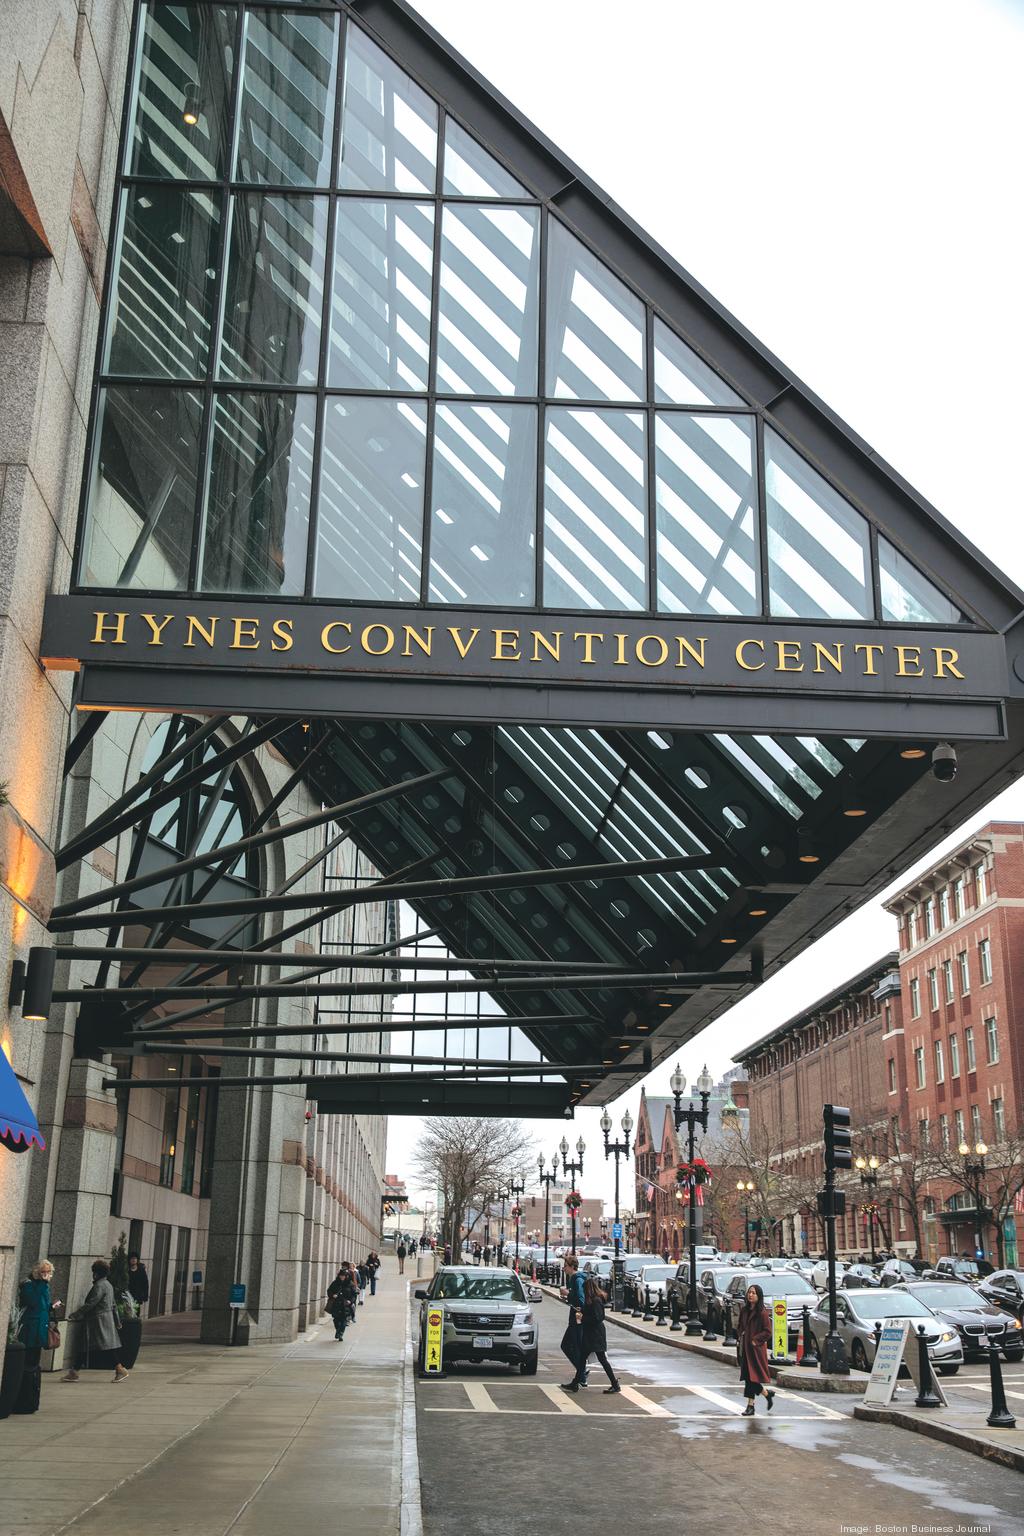 What Should Be Next for the Hynes Convention Center?